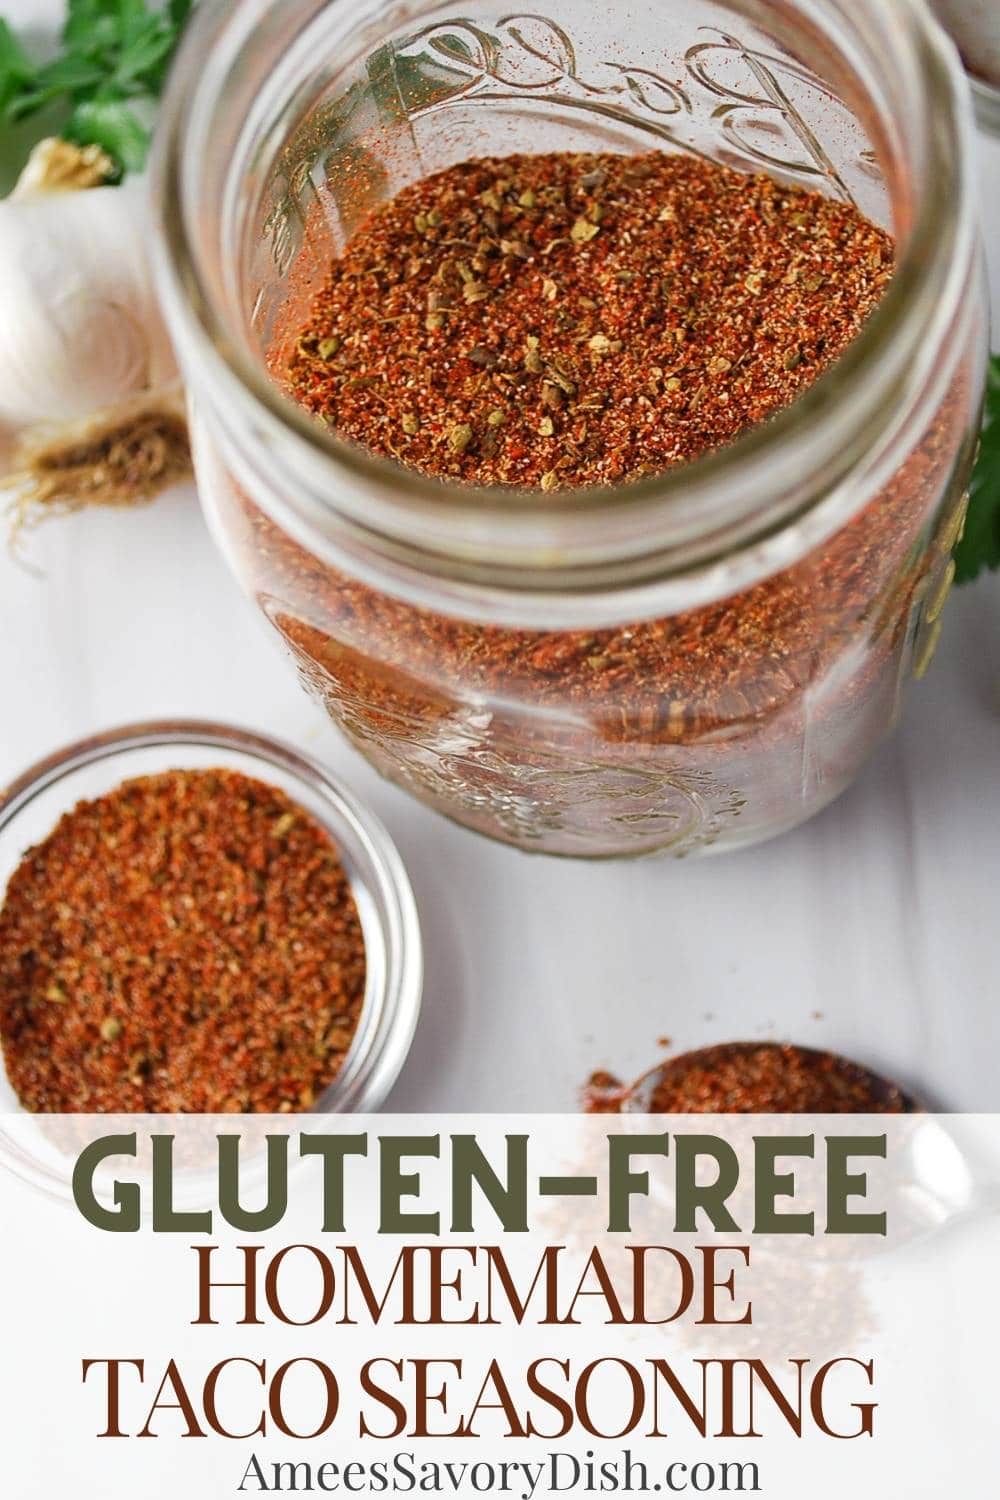 Make and shake gluten-free homemade taco seasoning! This blend of spicy, smoky, and sweet spices is just as flavorful and convenient as taco seasoning packets without any gluten or preservatives. via @Ameessavorydish